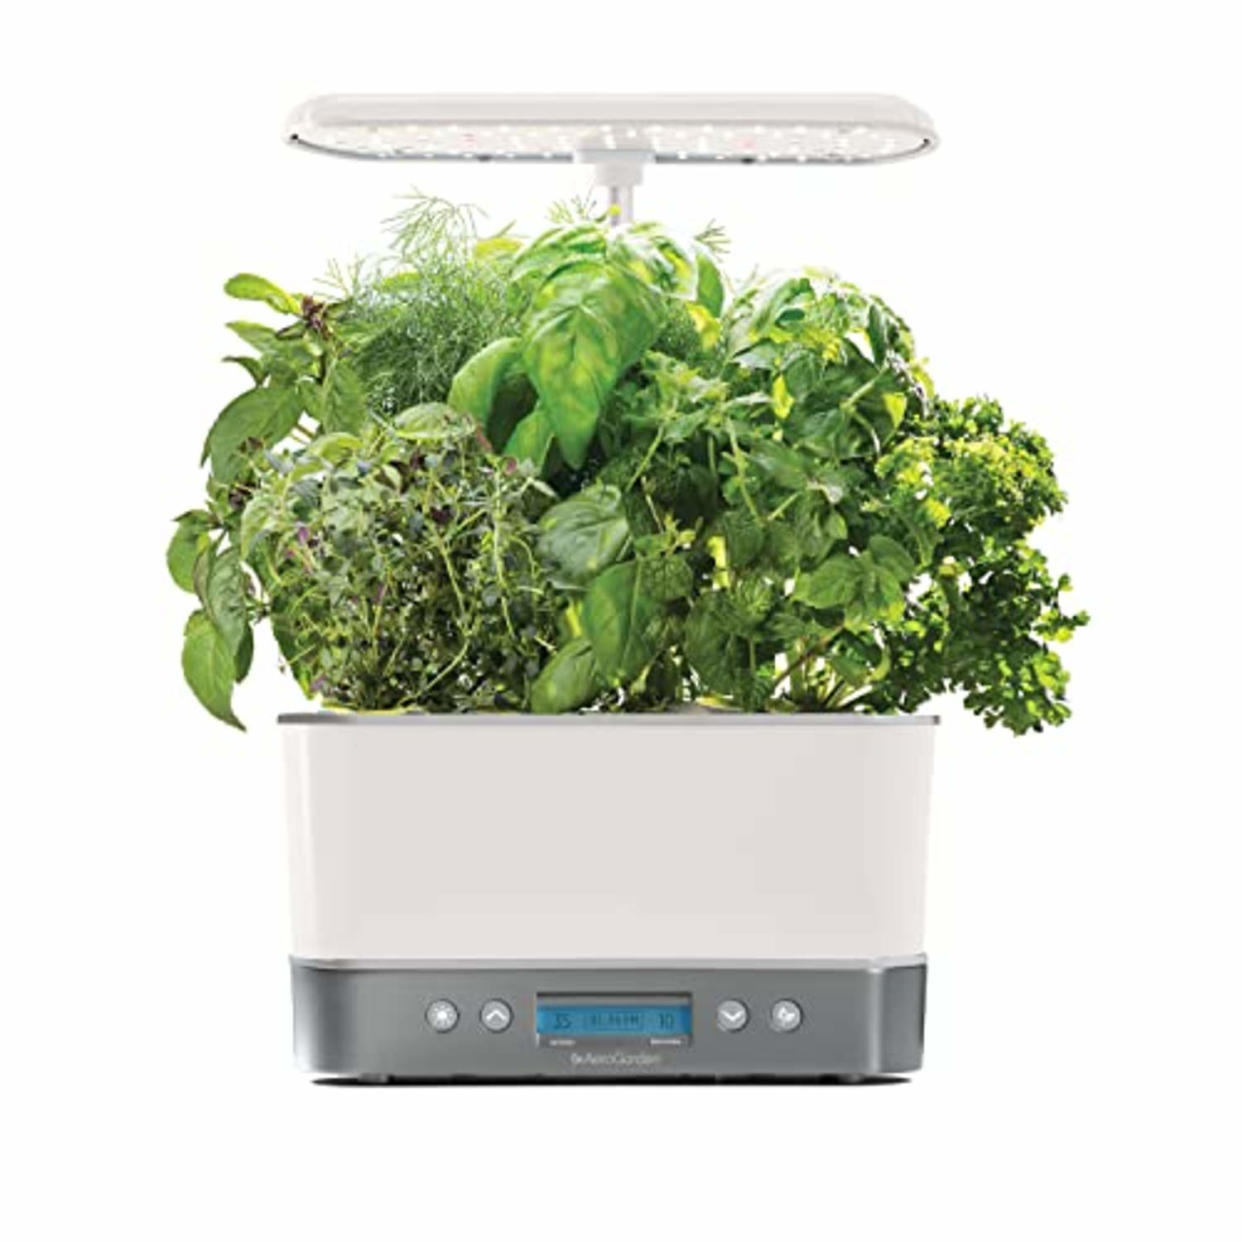 AeroGarden Harvest Elite Indoor Garden Hydroponic System with LED Grow Light and Herb Kit, Holds up to 6 Pods, White (AMAZON)